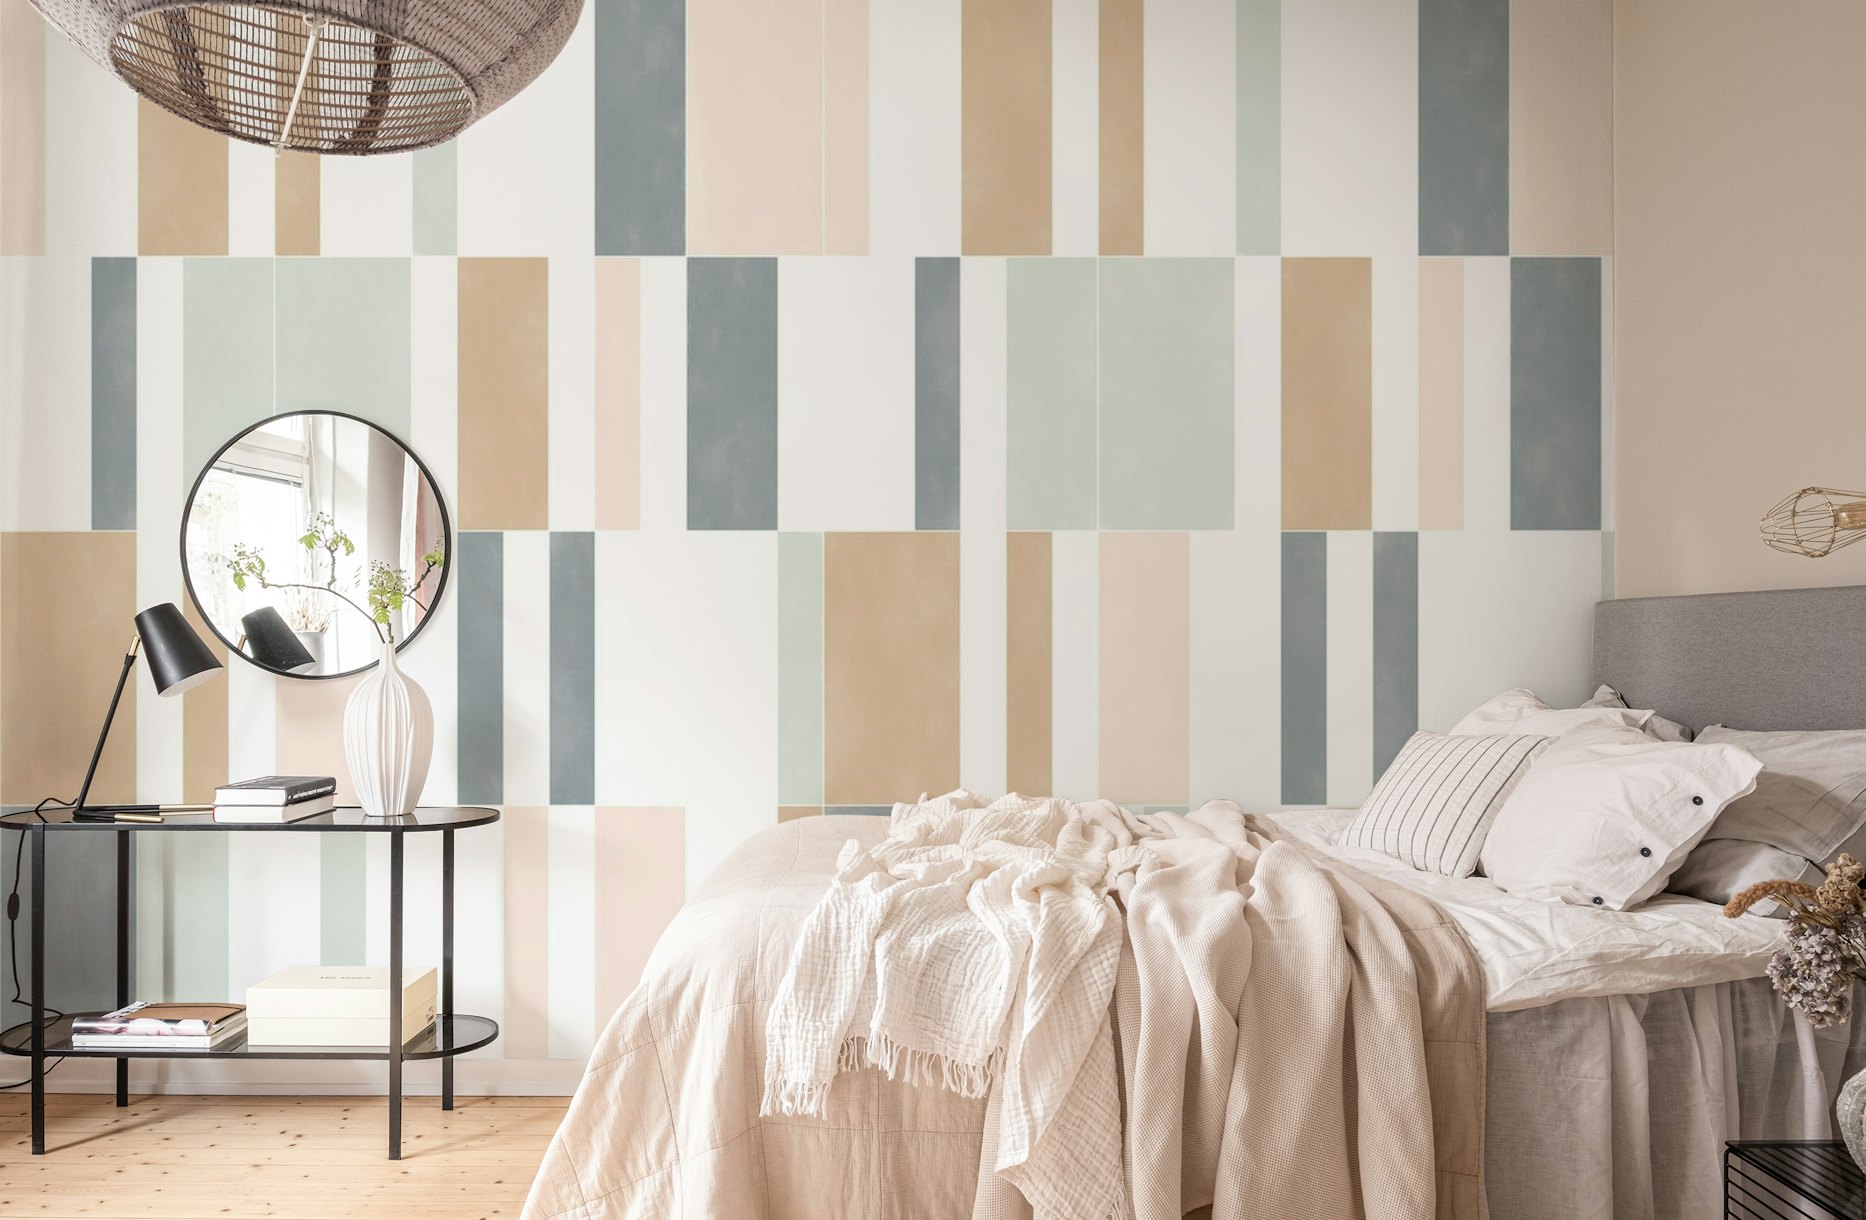 Muted Pastel Tiles One wallpaper